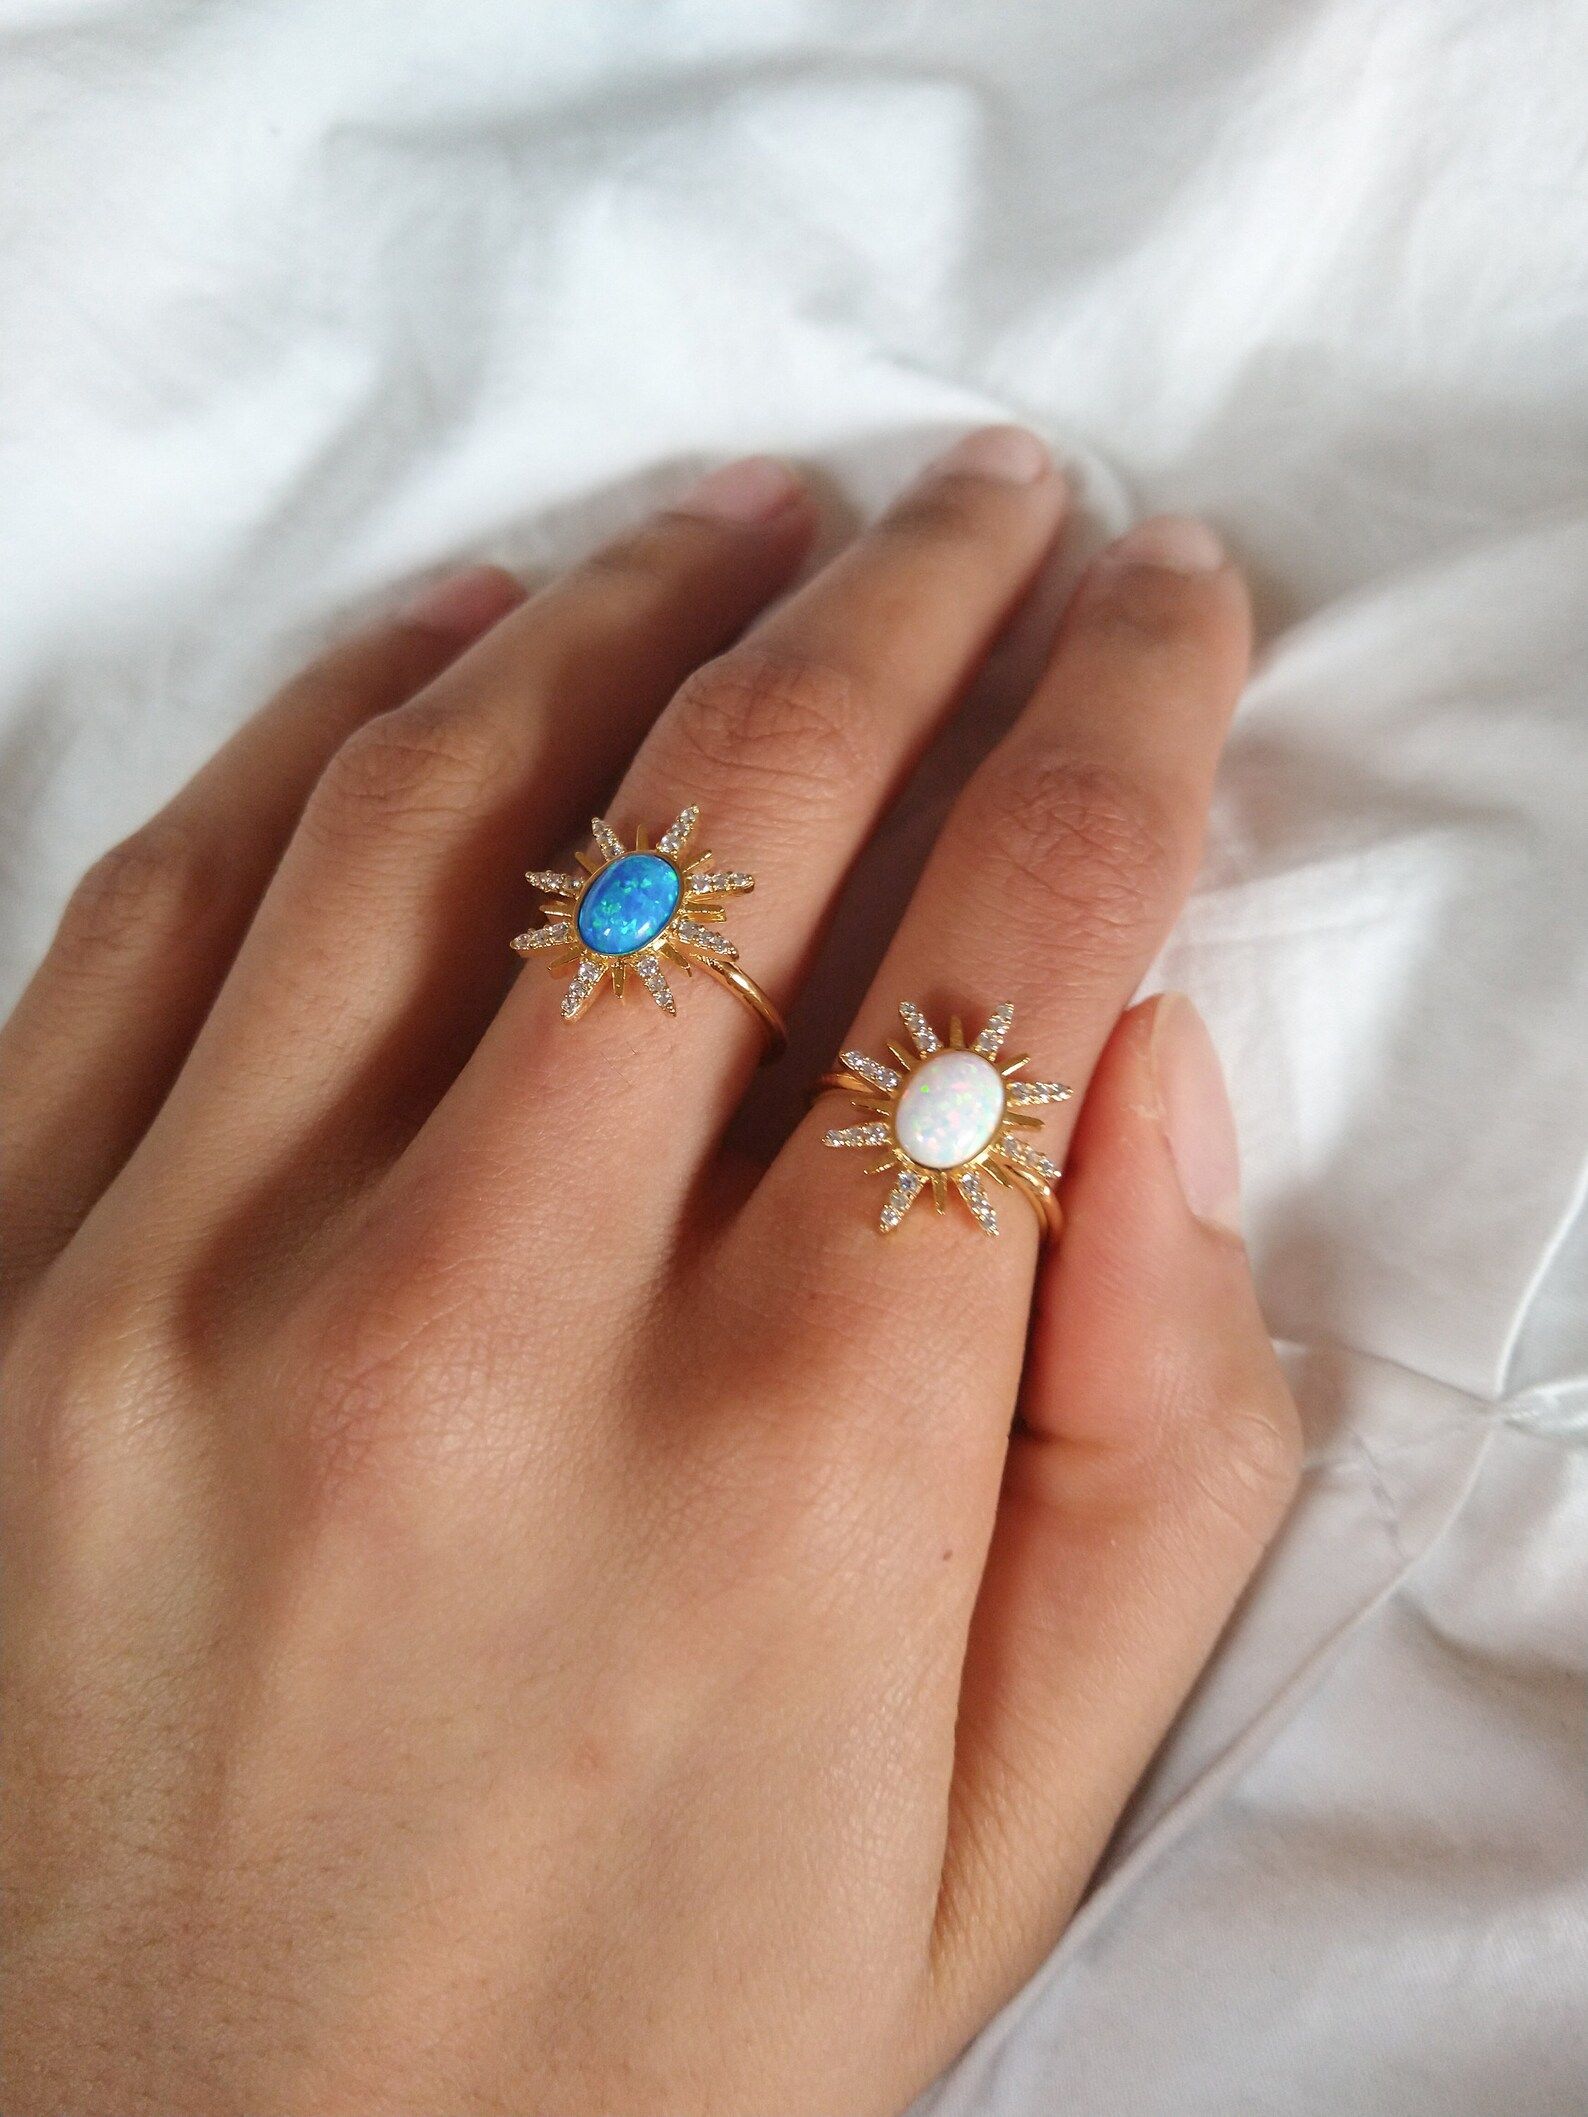 Galaxy - 24kgold plated, opal star ring, turquois star ring, sun ring | Etsy (CAD)